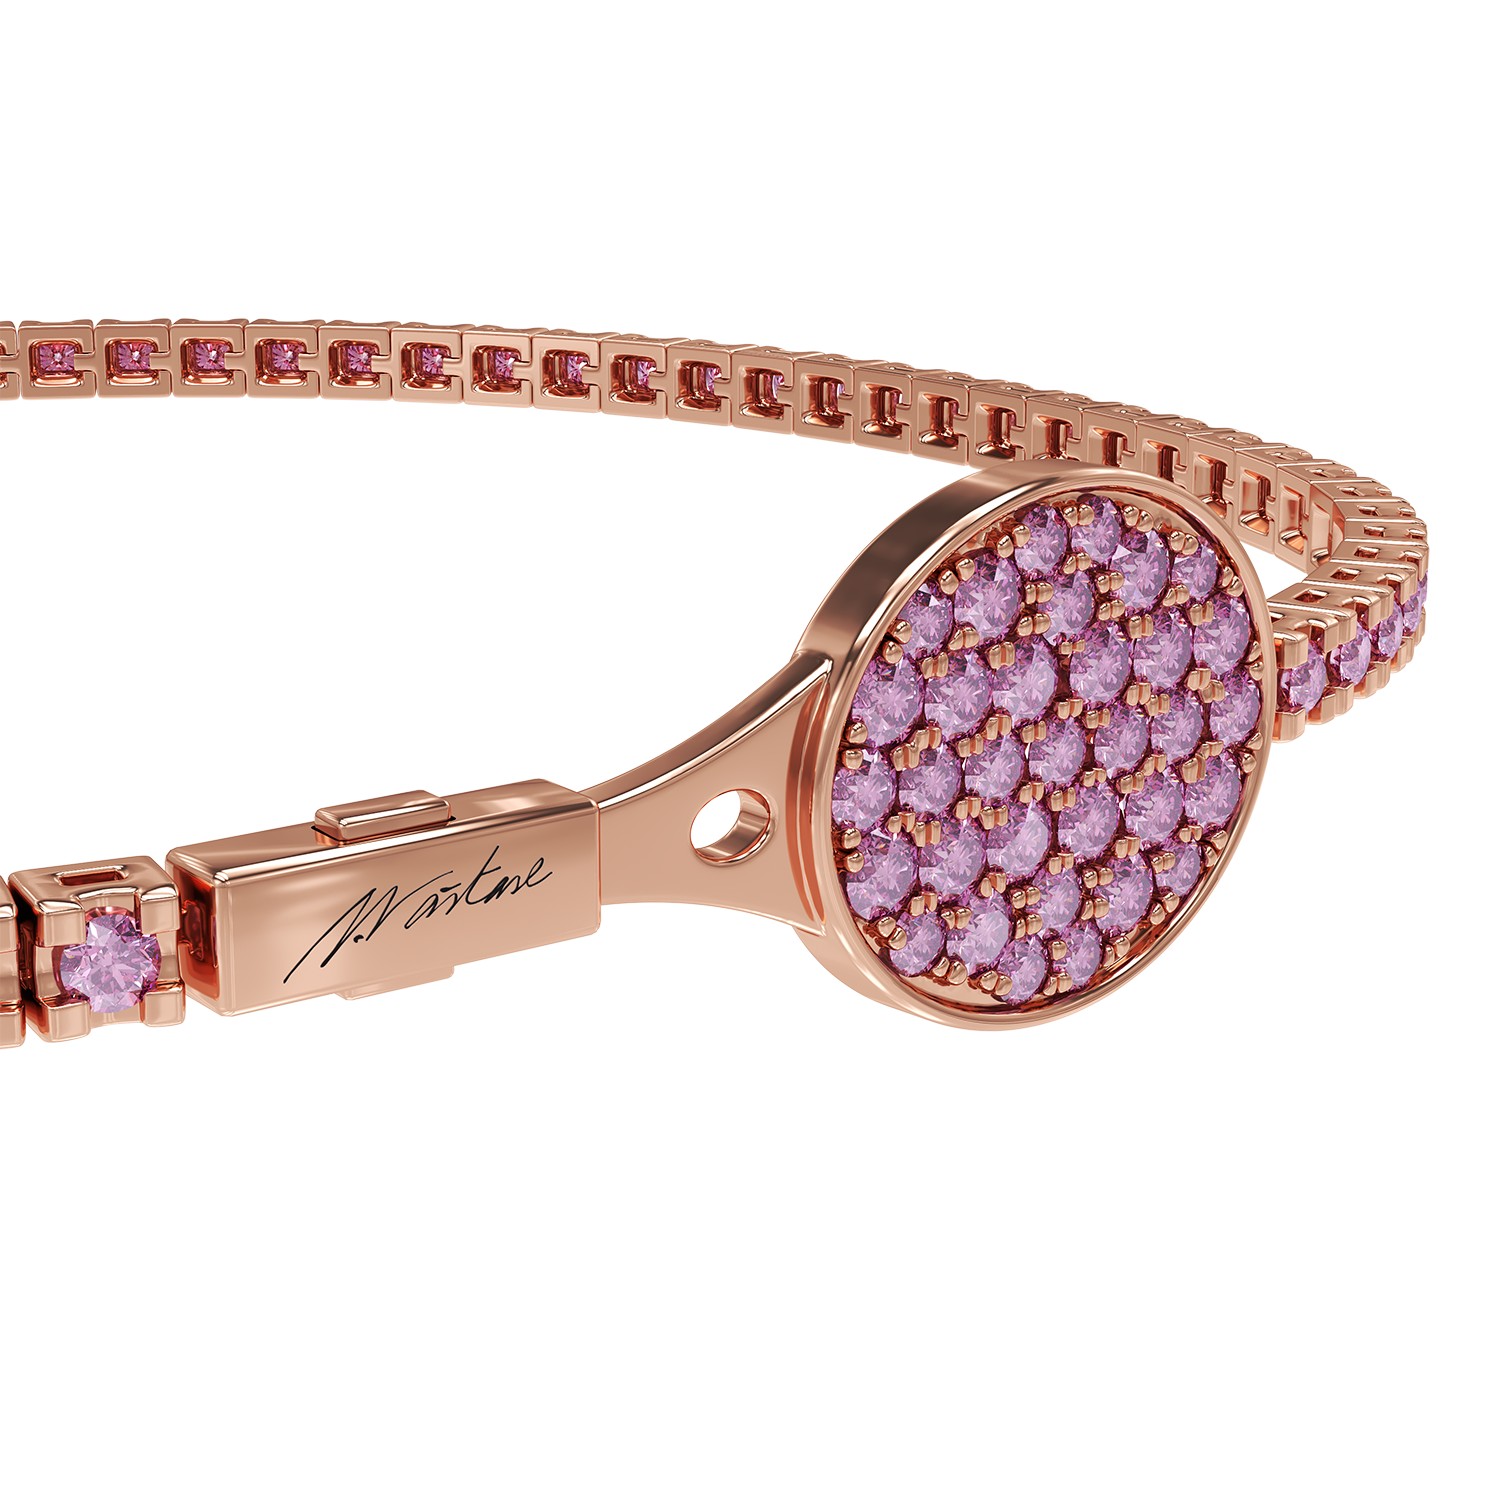 Glory tennis bracelet with 1.82ct pink sapphires